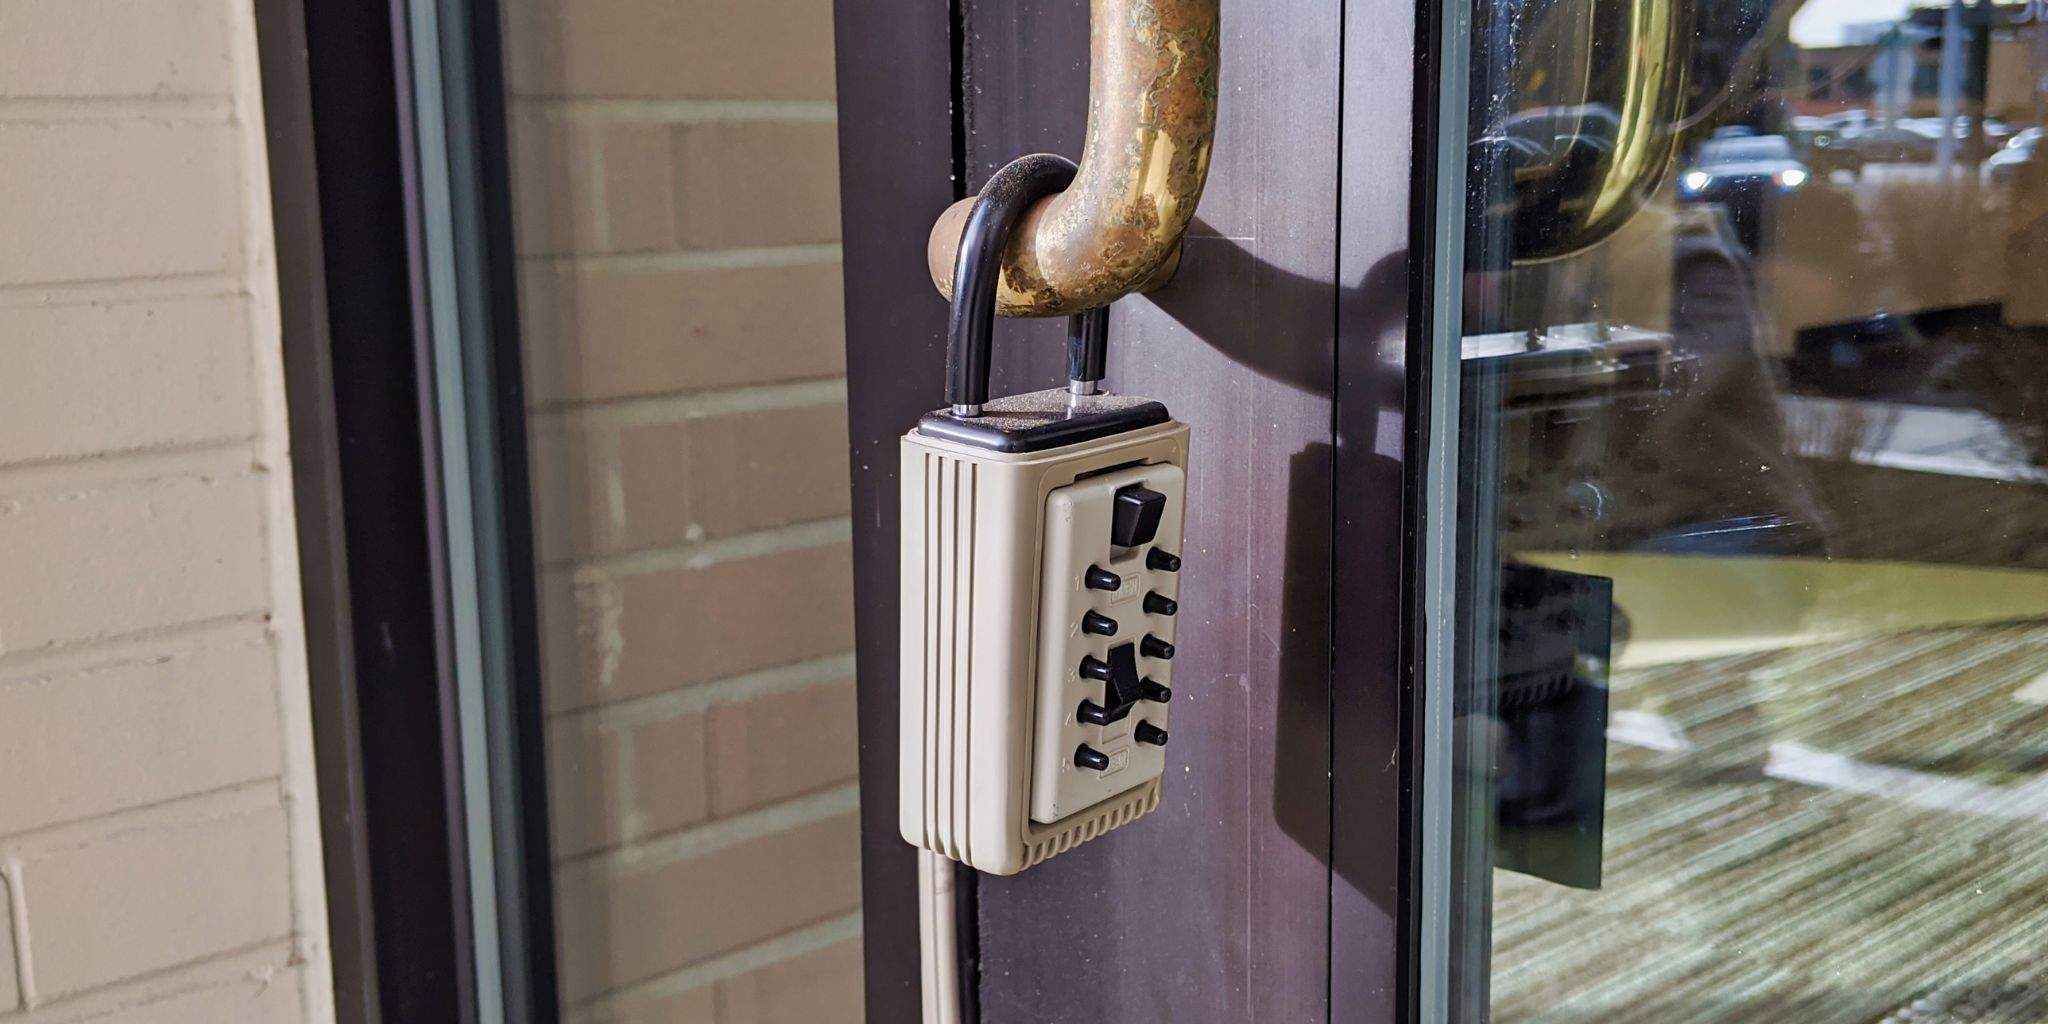 Smart Door Lock vs. Traditional: Which Is the Best Choice for Your Home?